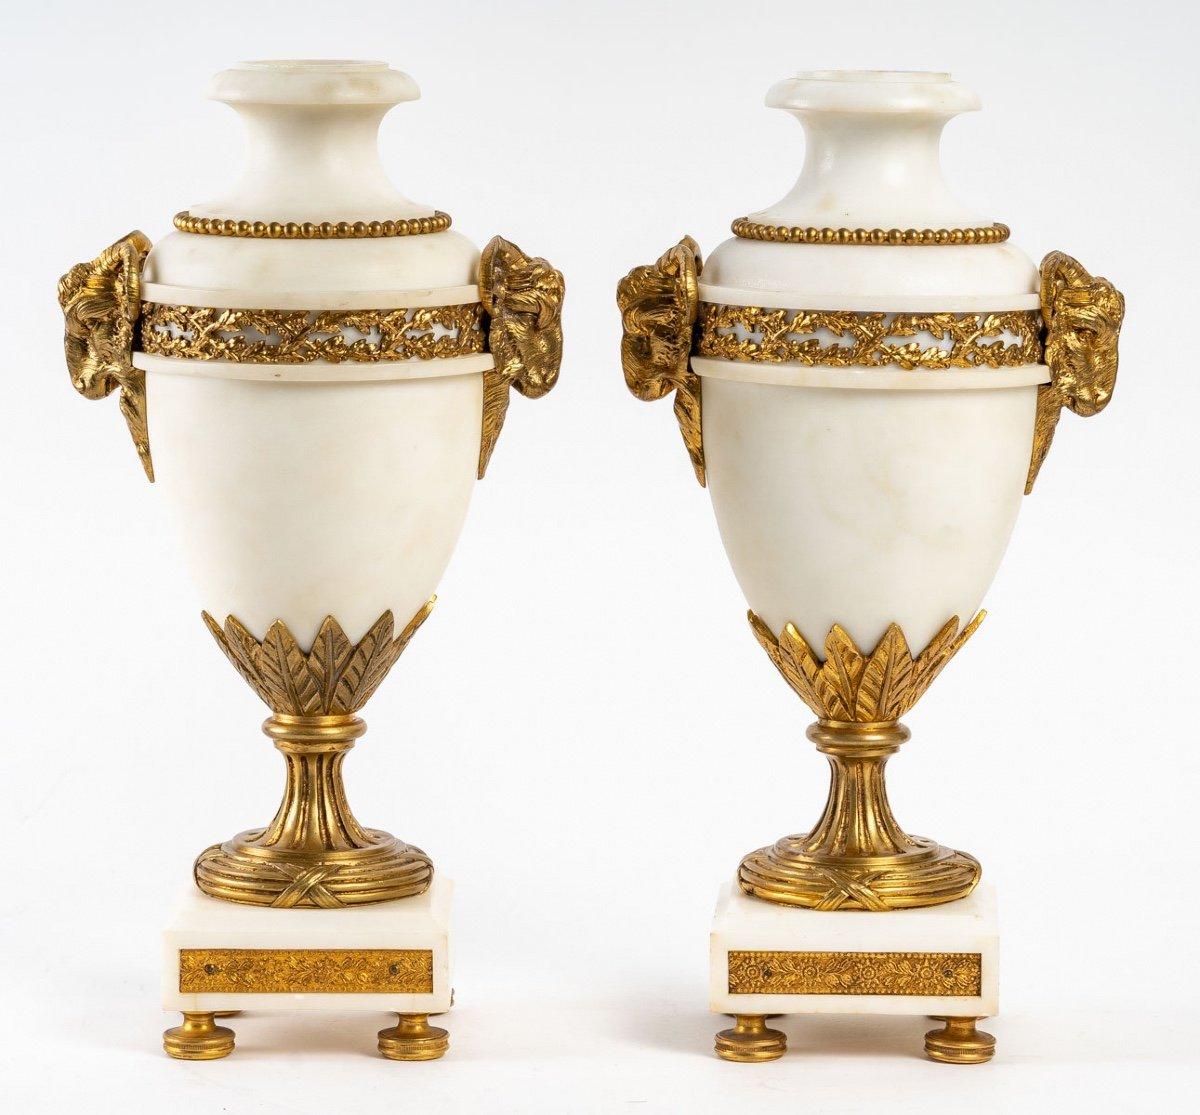 A pair of white marble Cassolettes with ormolu decoration, Louis XVI style. Napoleon III period, late 19th century
In perfect condition
Measures: H: 35 cm, W: 19 cm, D: 14 cm.